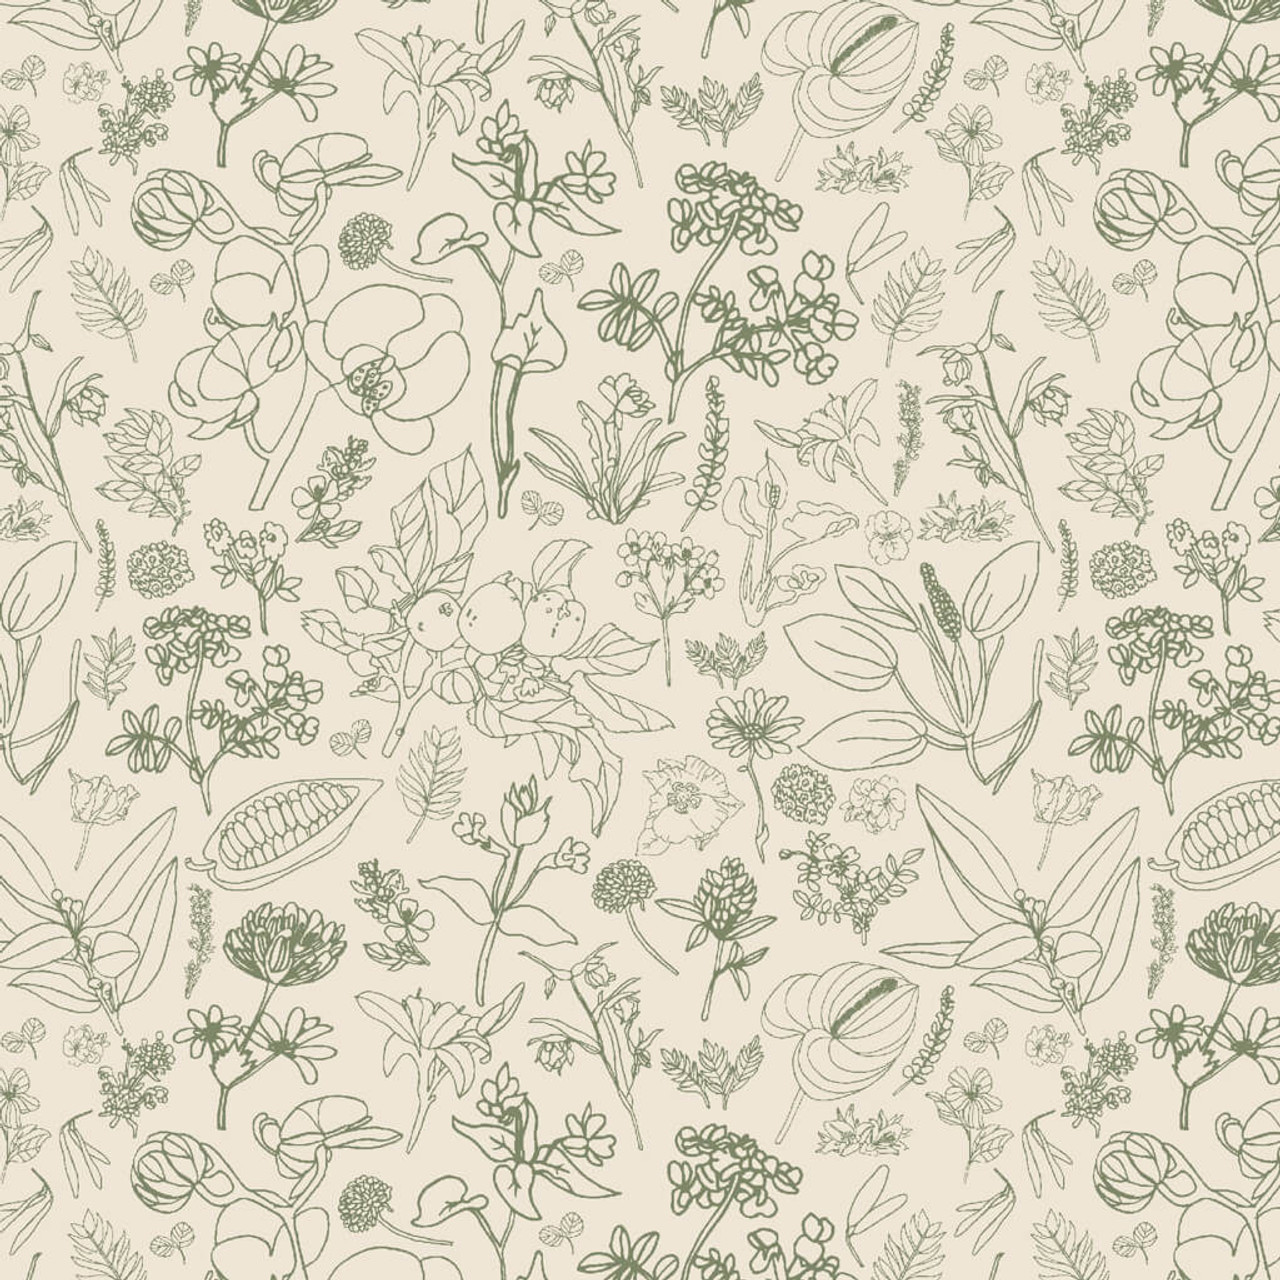 Detailed line-drawn botanical patterns on a sage-coloured cotton fabric from P & B Textiles' 'Au Nature!' collection, designed by Jacqueline Schmidt.